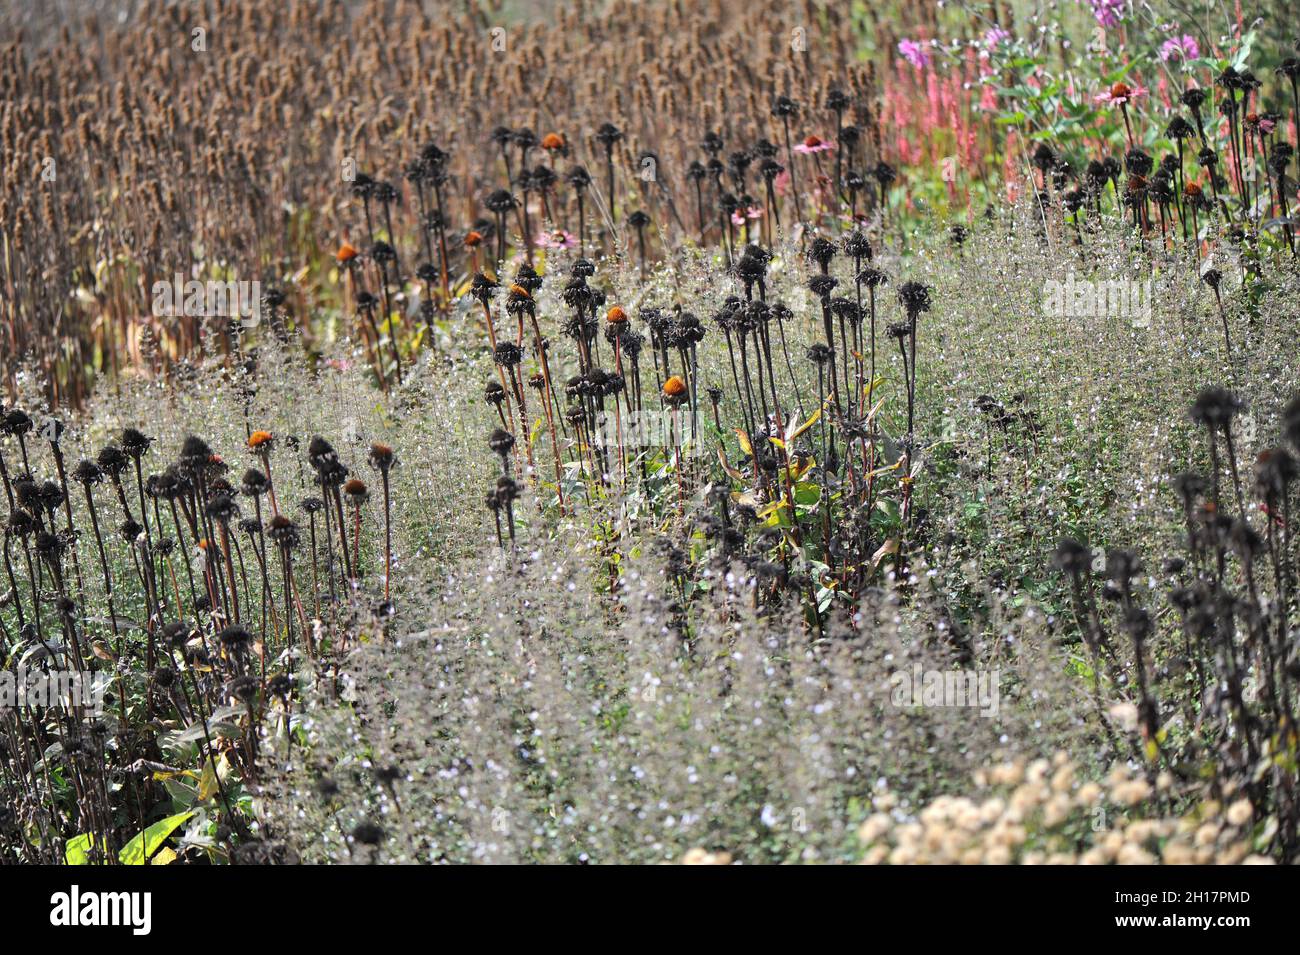 WEIL AM RHEIN, GERMANY - 22 SEPTEMBER 2021: Planting in perennial meadow style designed by Piet Oudolf at the Vitra Design Museum Stock Photo